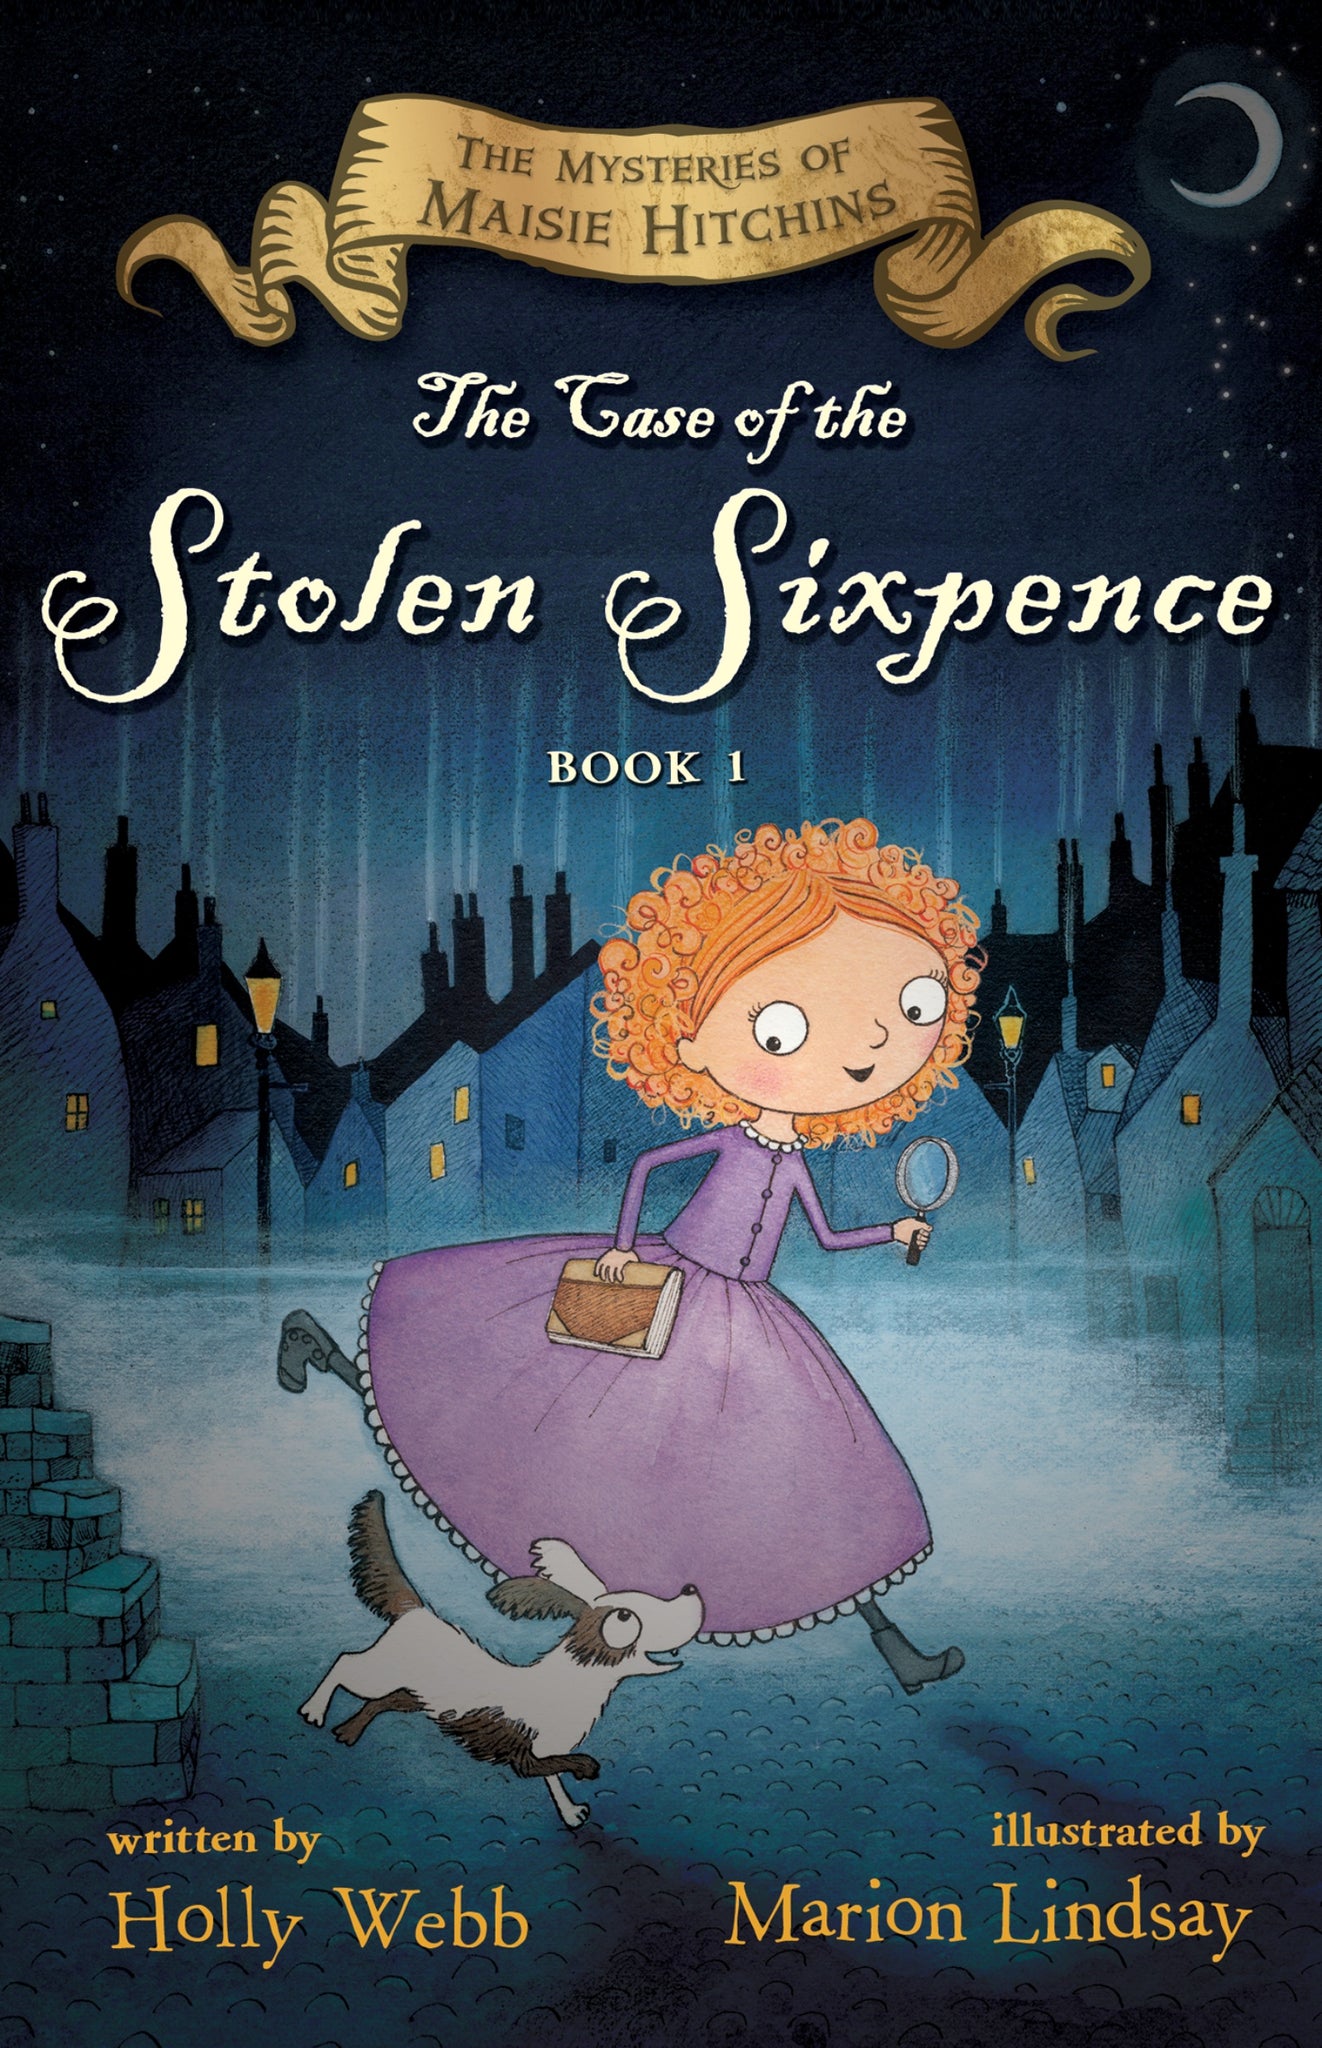 The Case Of The Stolen Sixpence : The Mysteries of Maisie Hitchins Book 1